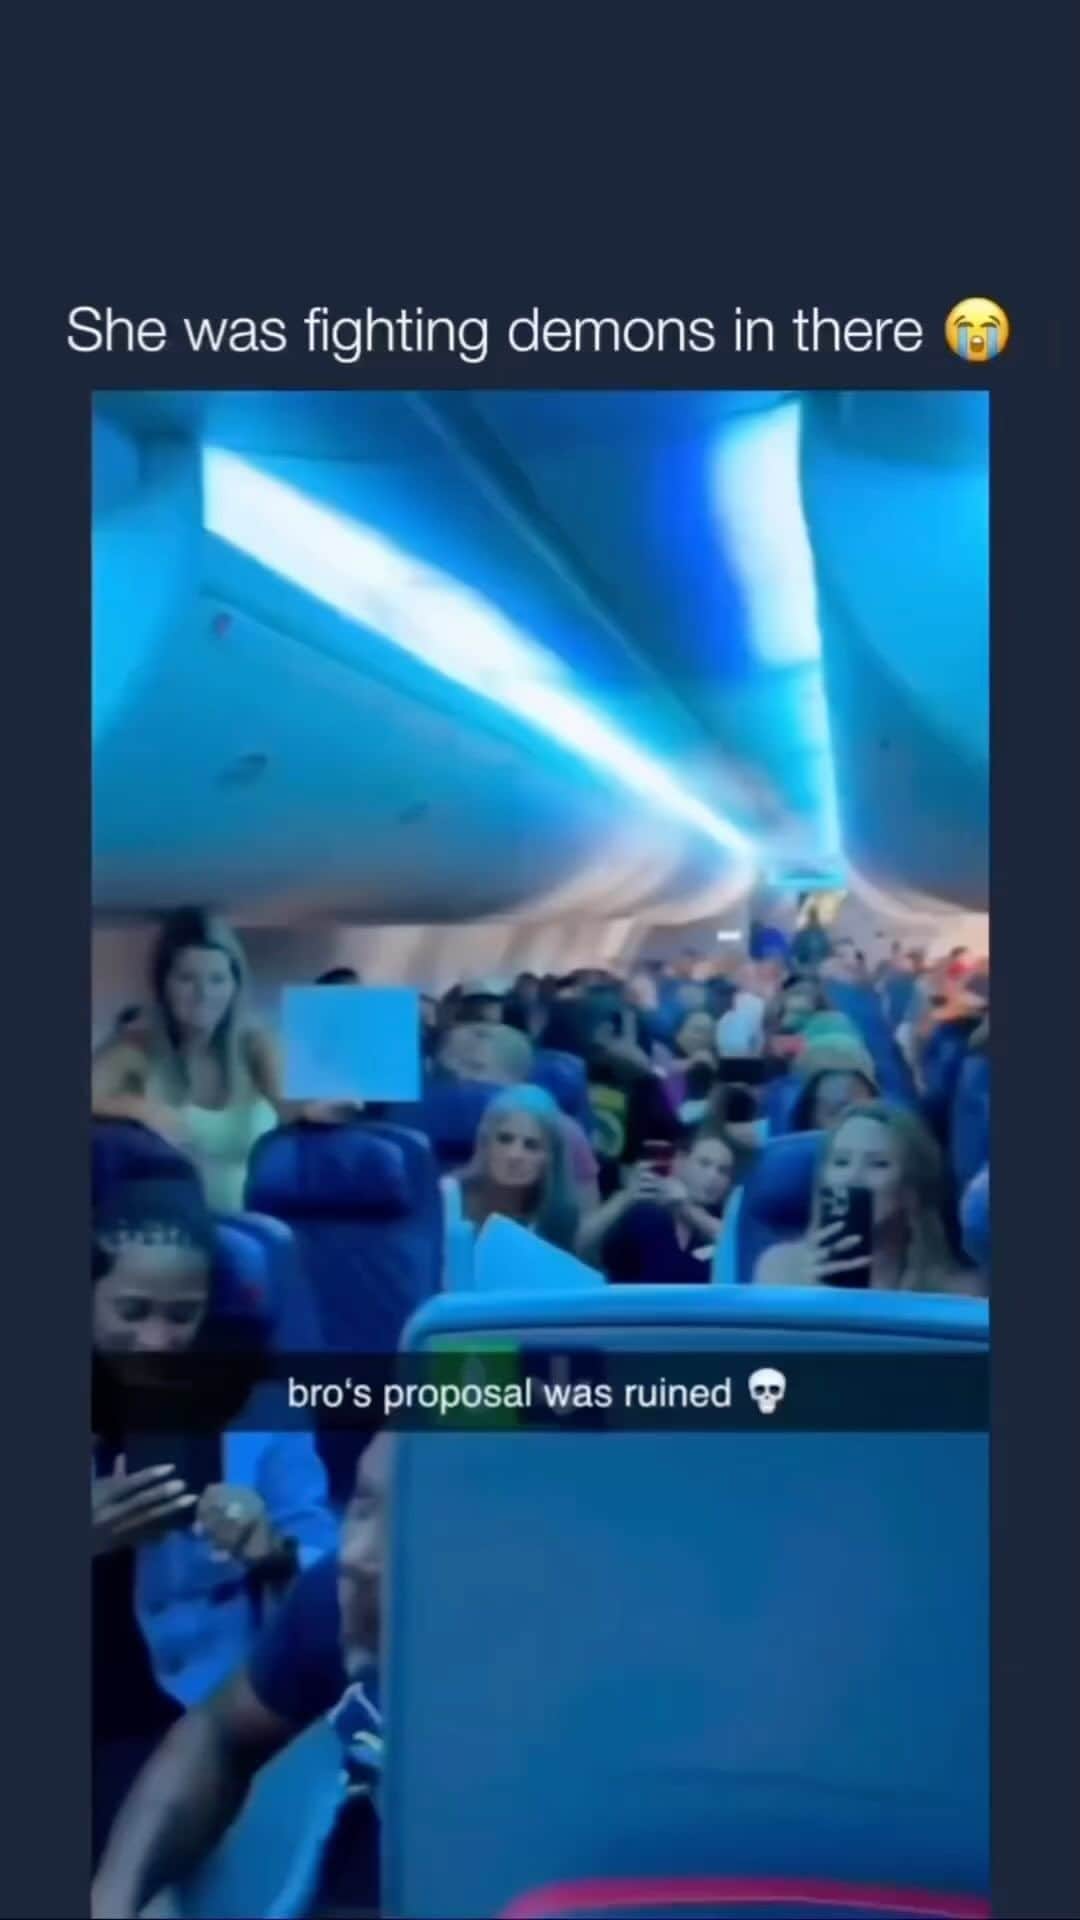 WEDDING APPARELのインスタグラム：「The problem is.. everyone recorded that moment😬😭 Comment below your reaction if it were you😅  #proposal #proposalvideo #proposalfail #weddingfail #caughtoncam #memes #flights #surpriseproposal DM for credits/removal」